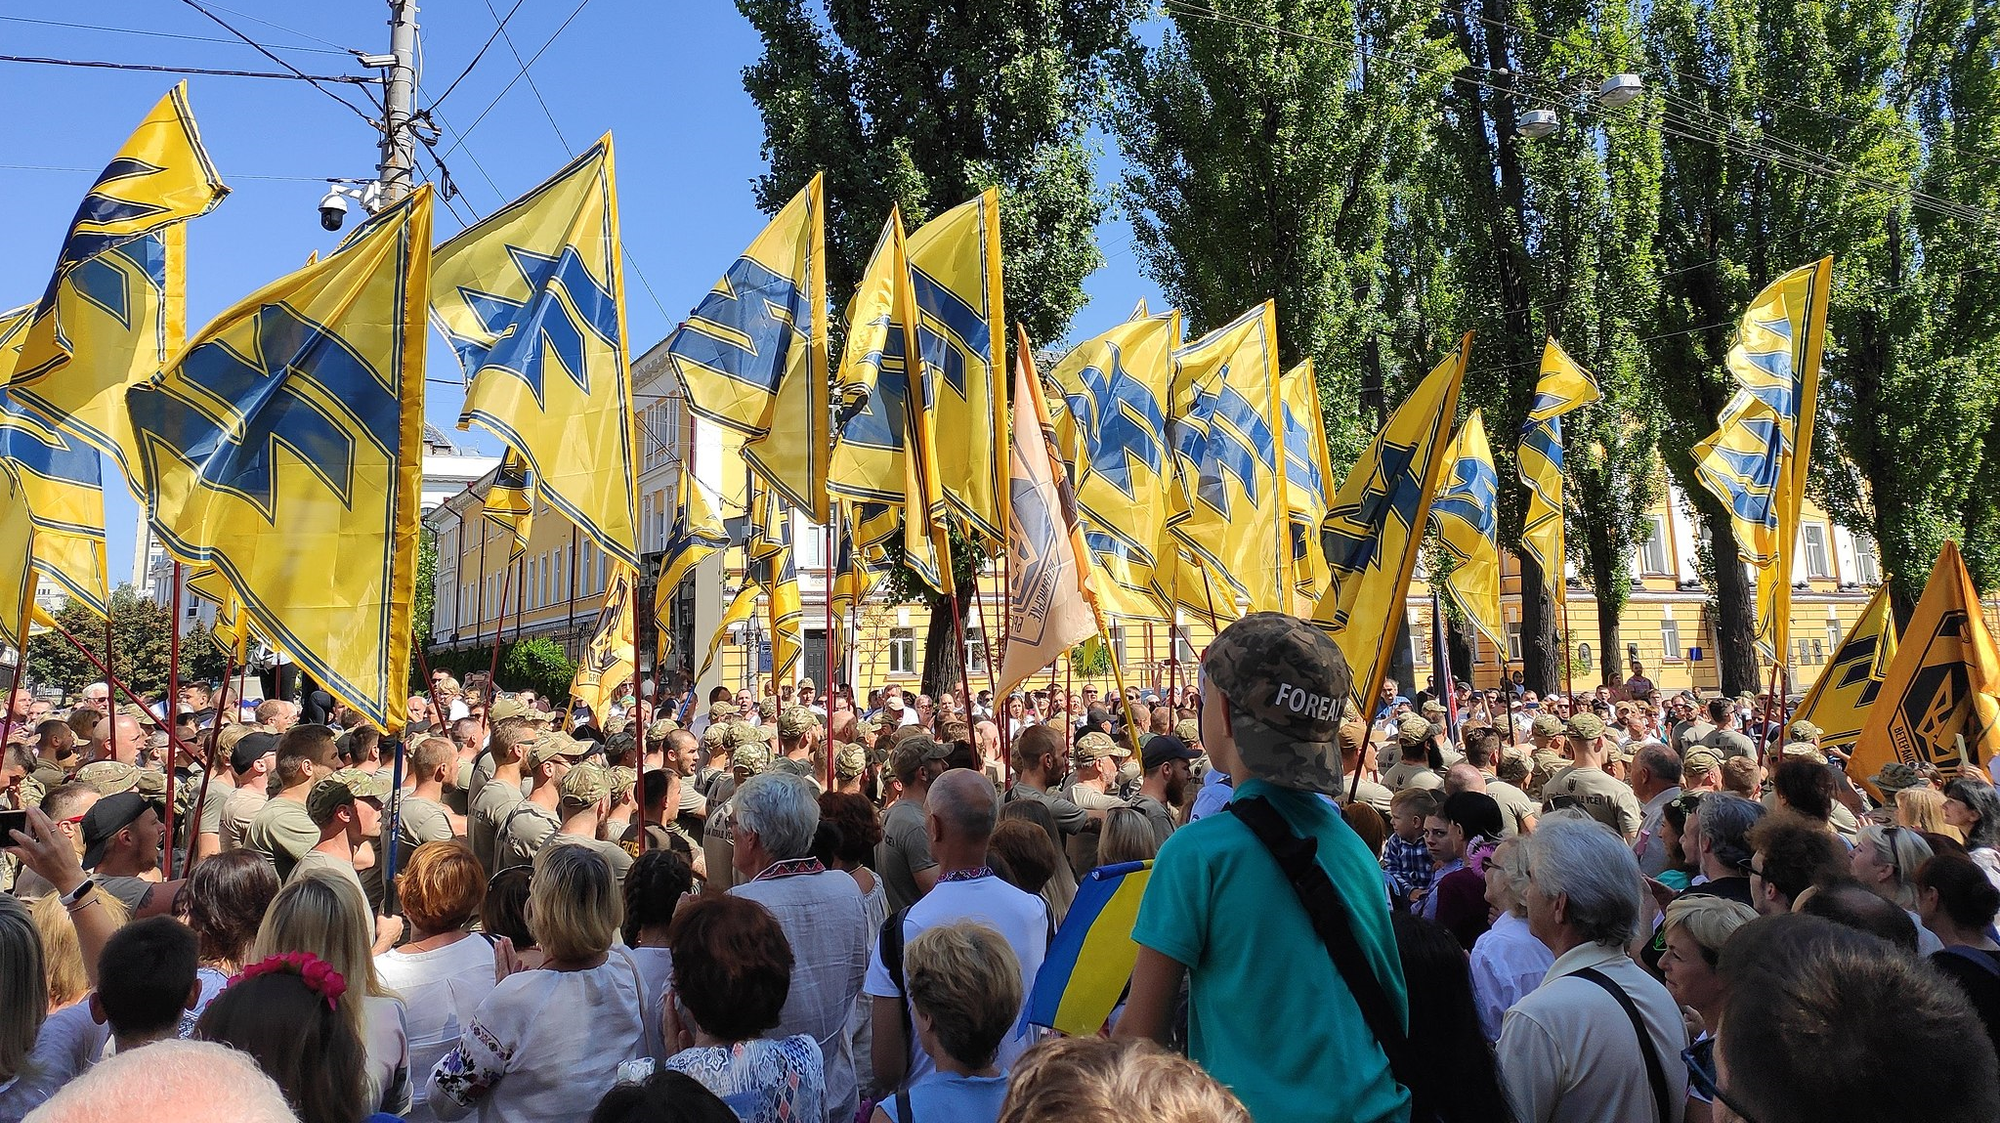 Media Once Called Azov Neo-Nazis. Now They Hide That Fact